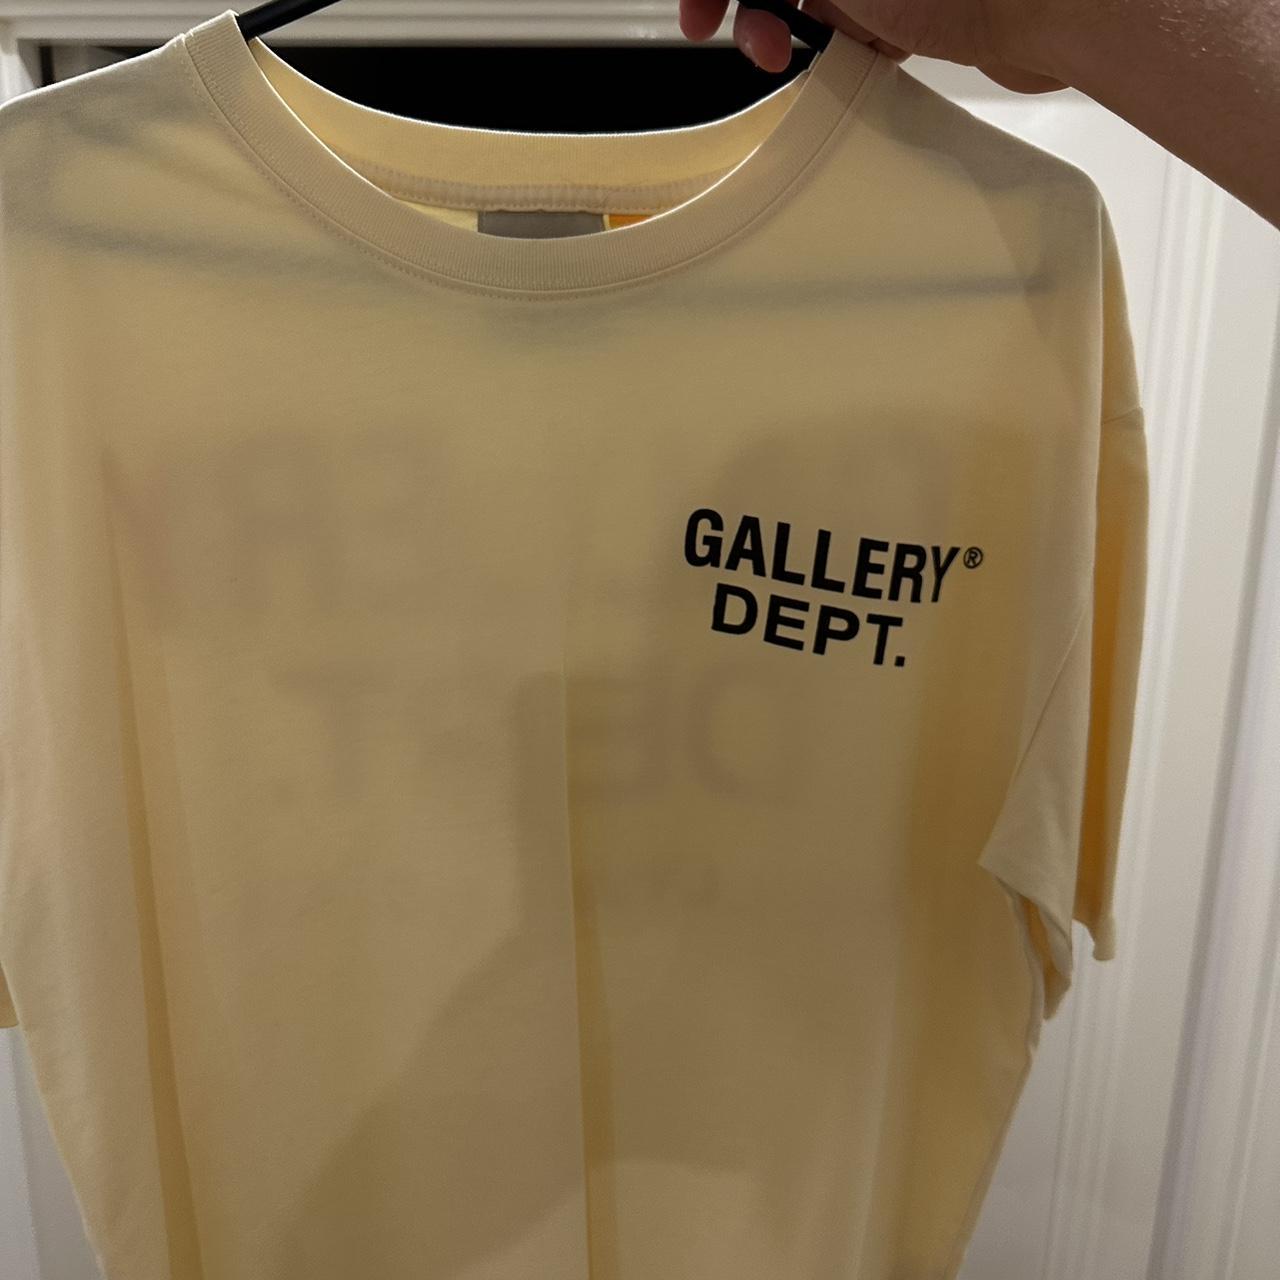 #gallery #dept Size L Worn once too small - Depop